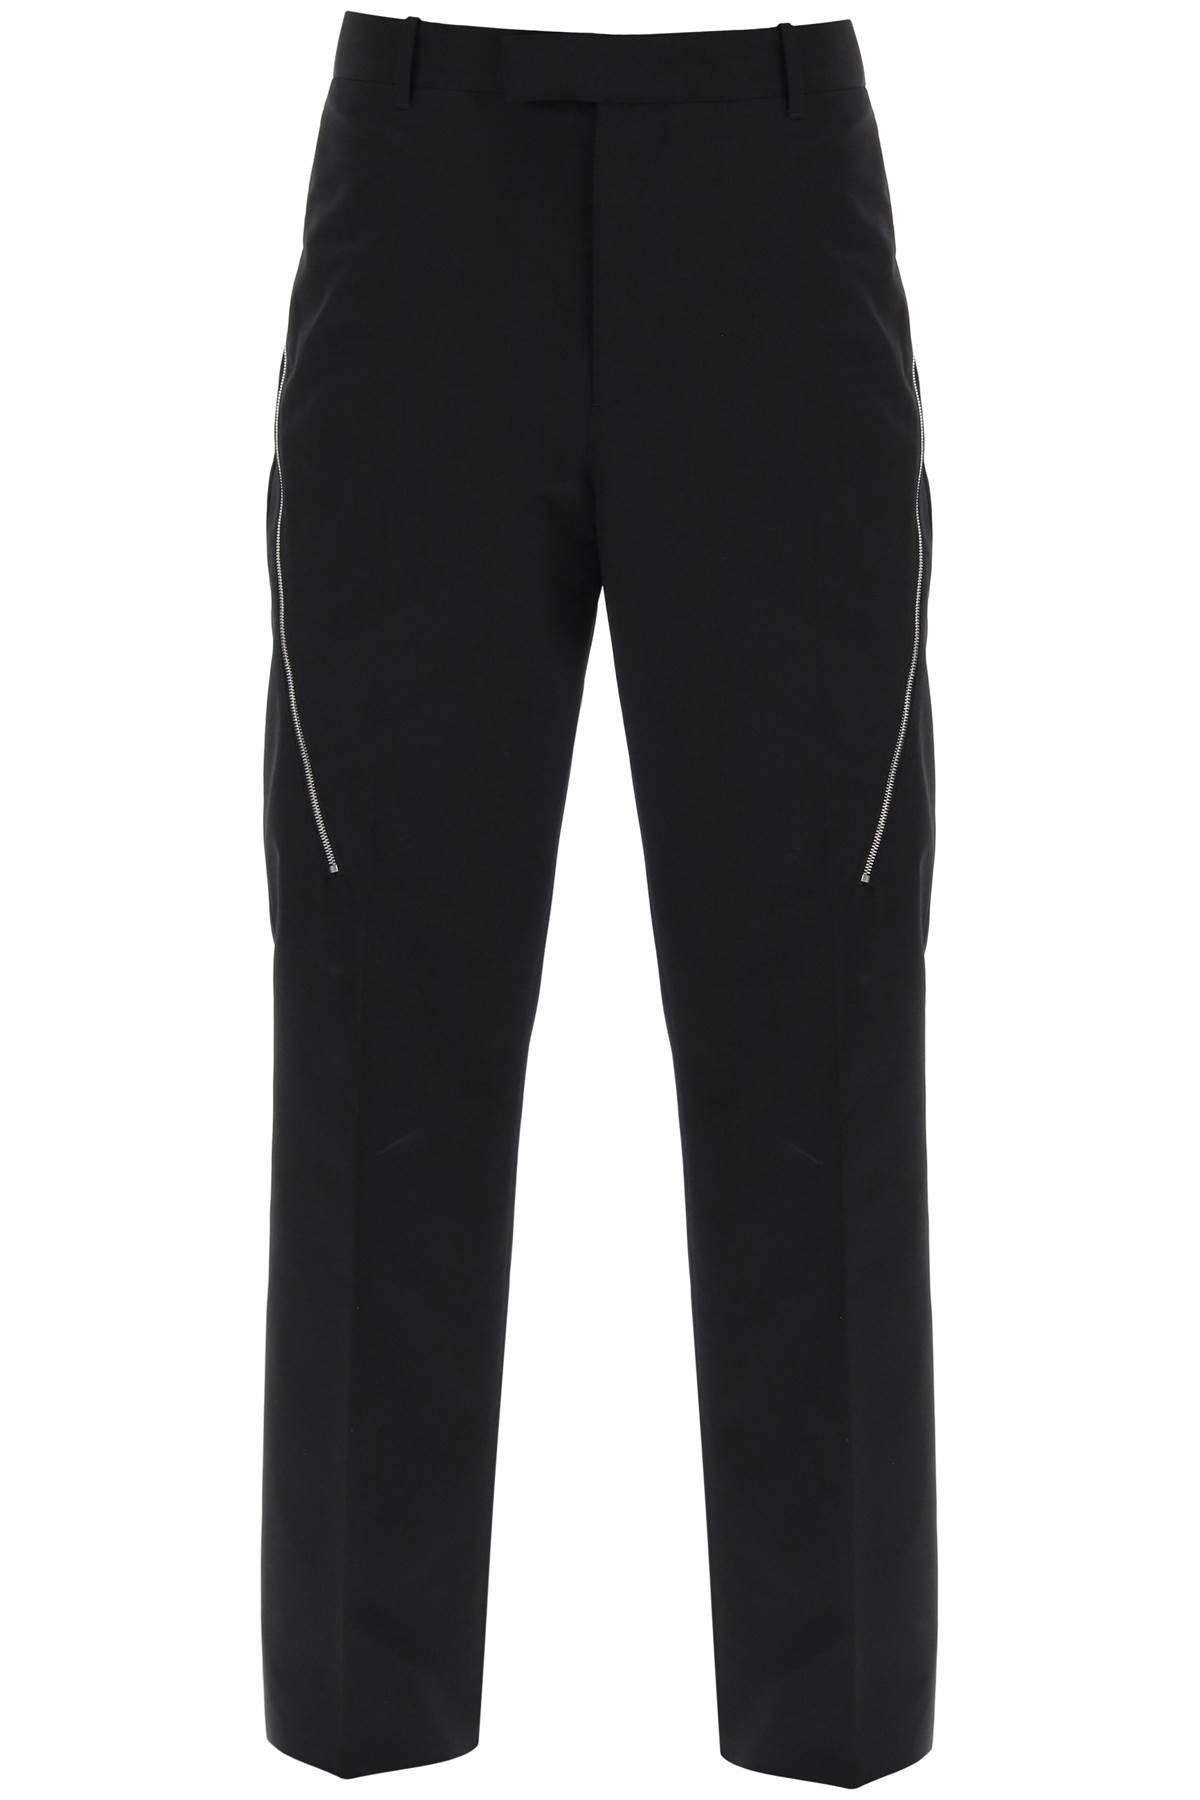 Ferragamo Pants With Contrasting Inserts In Black